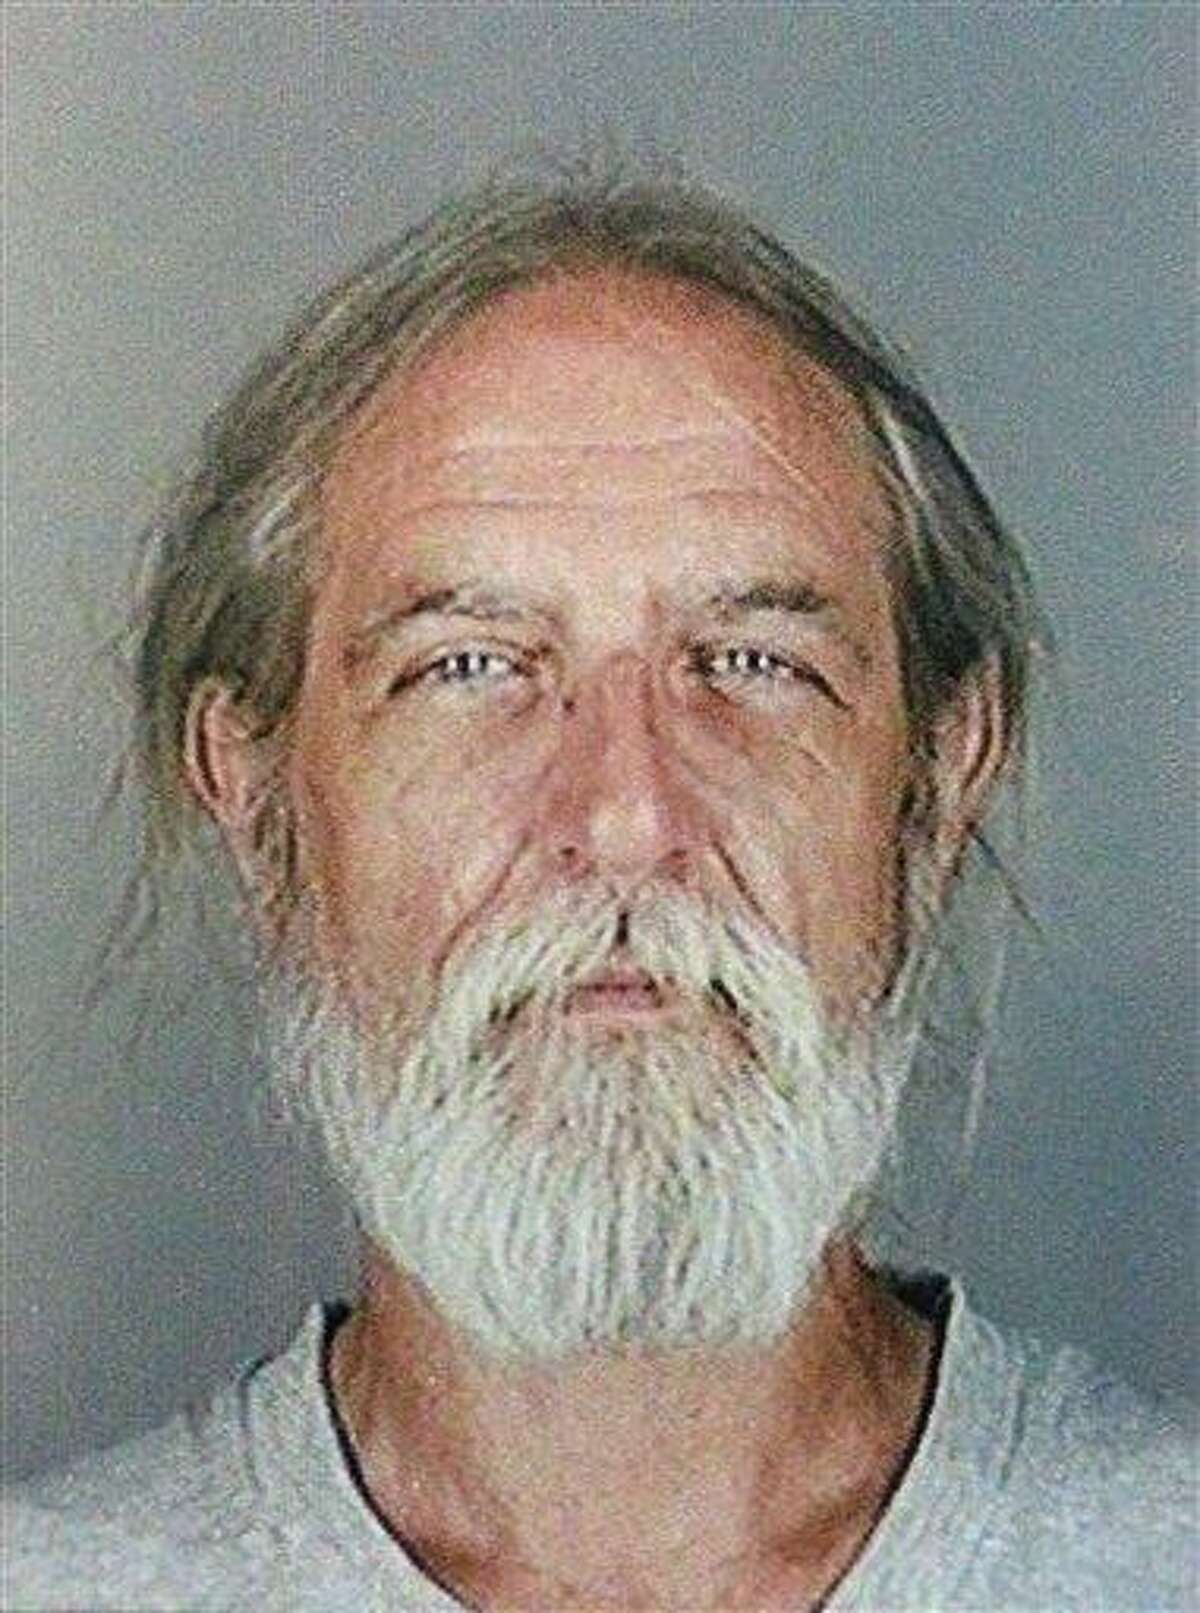 William H. Spengler Jr., 62, who served 17 years in prison for the 1980 slaying of Rose Spengler, 92, inside her home. Authorities say Spengler set a house and car ablaze Monday in Webster, N.Y., and then opened fire, killing two firefighters and wounding two others. After exchanging gunfire with police, Spengler also killed himself. AP Photo/Monroe County Sheriff's Department